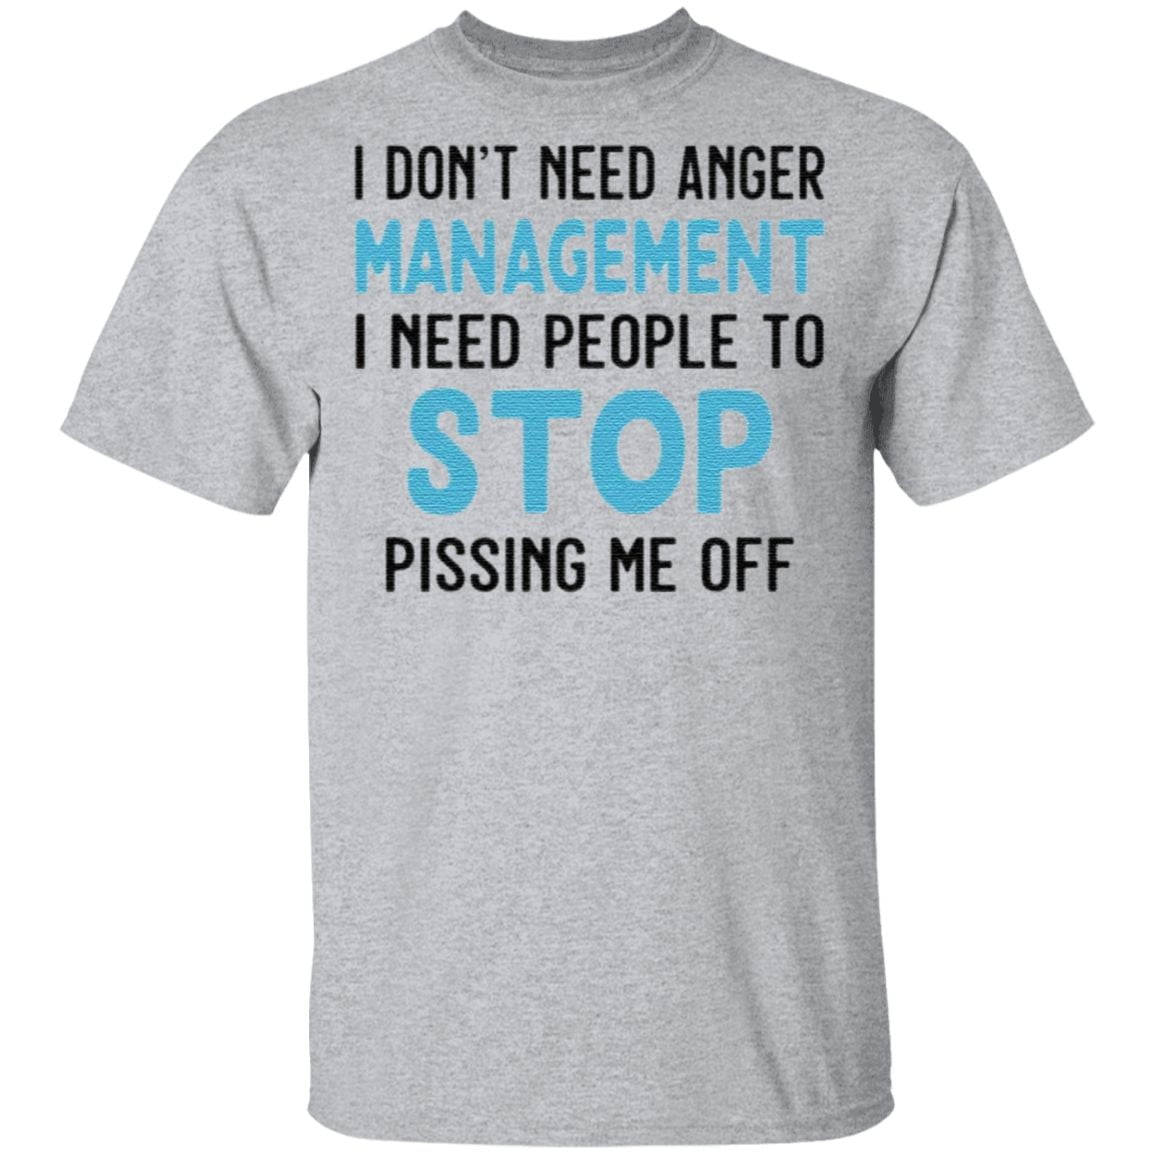 I Don’t Need Anger Management I Need People To Stop Pissing Me Off T Shirt